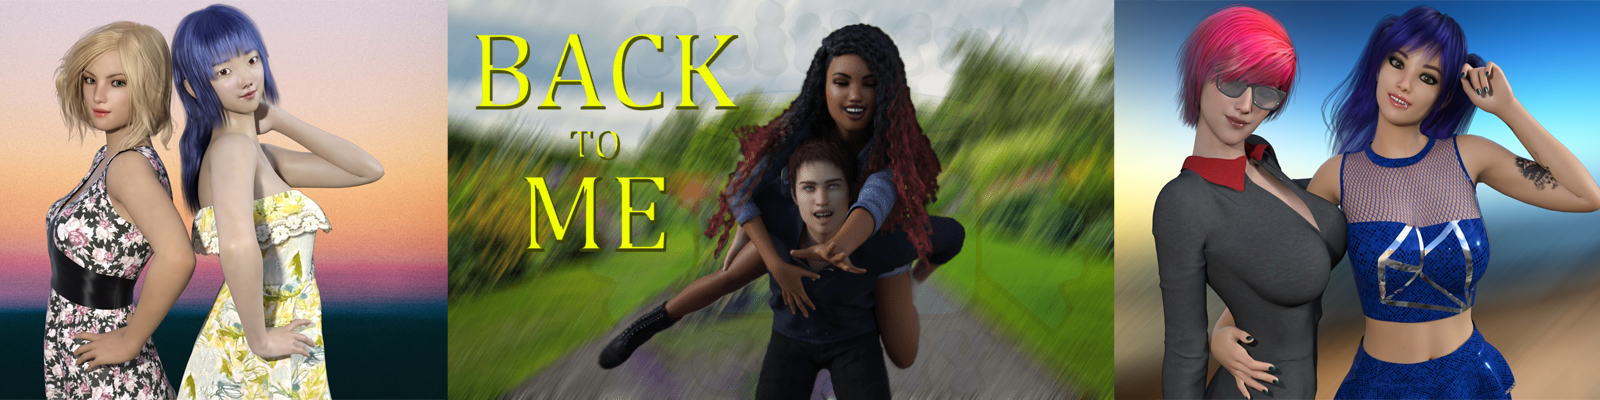 BACK to ME poster